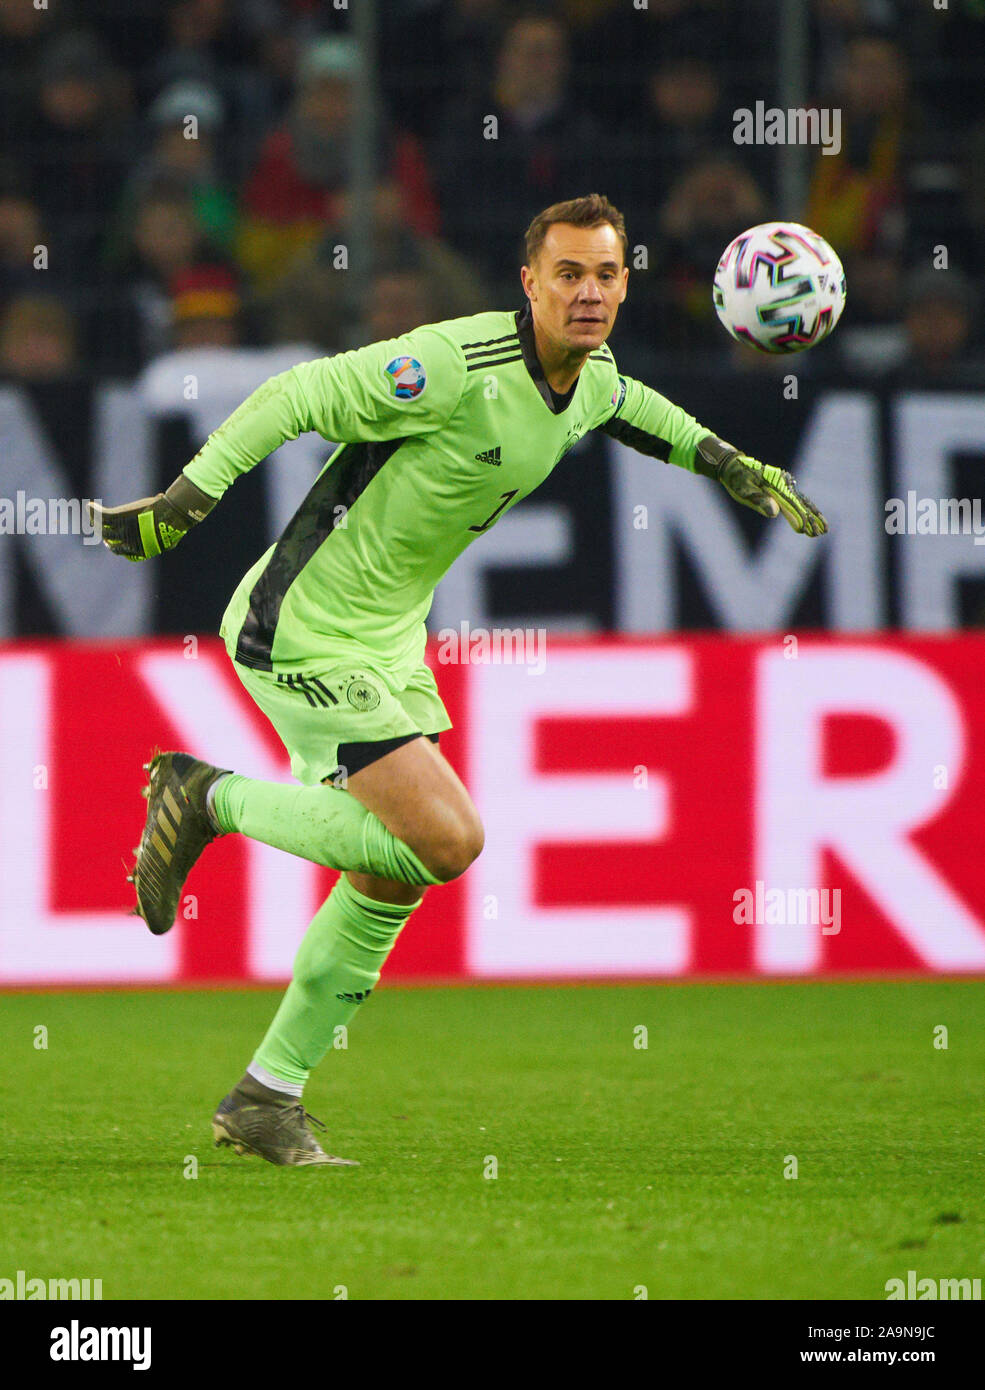 Mönchengladbach, Germany. 16th Nov 2019. Manuel NEUER, DFB 1 goalkeeper, GERMANY - BELARUS Important: DFB regulations prohibit any use of photographs as image sequences and/or quasi-video. Qualification for European Championships, EM Quali, 2020 Season 2019/2020, November 16, 2019 in Mönchengladbach, Germany. Credit: Peter Schatz/Alamy Live News Stock Photo